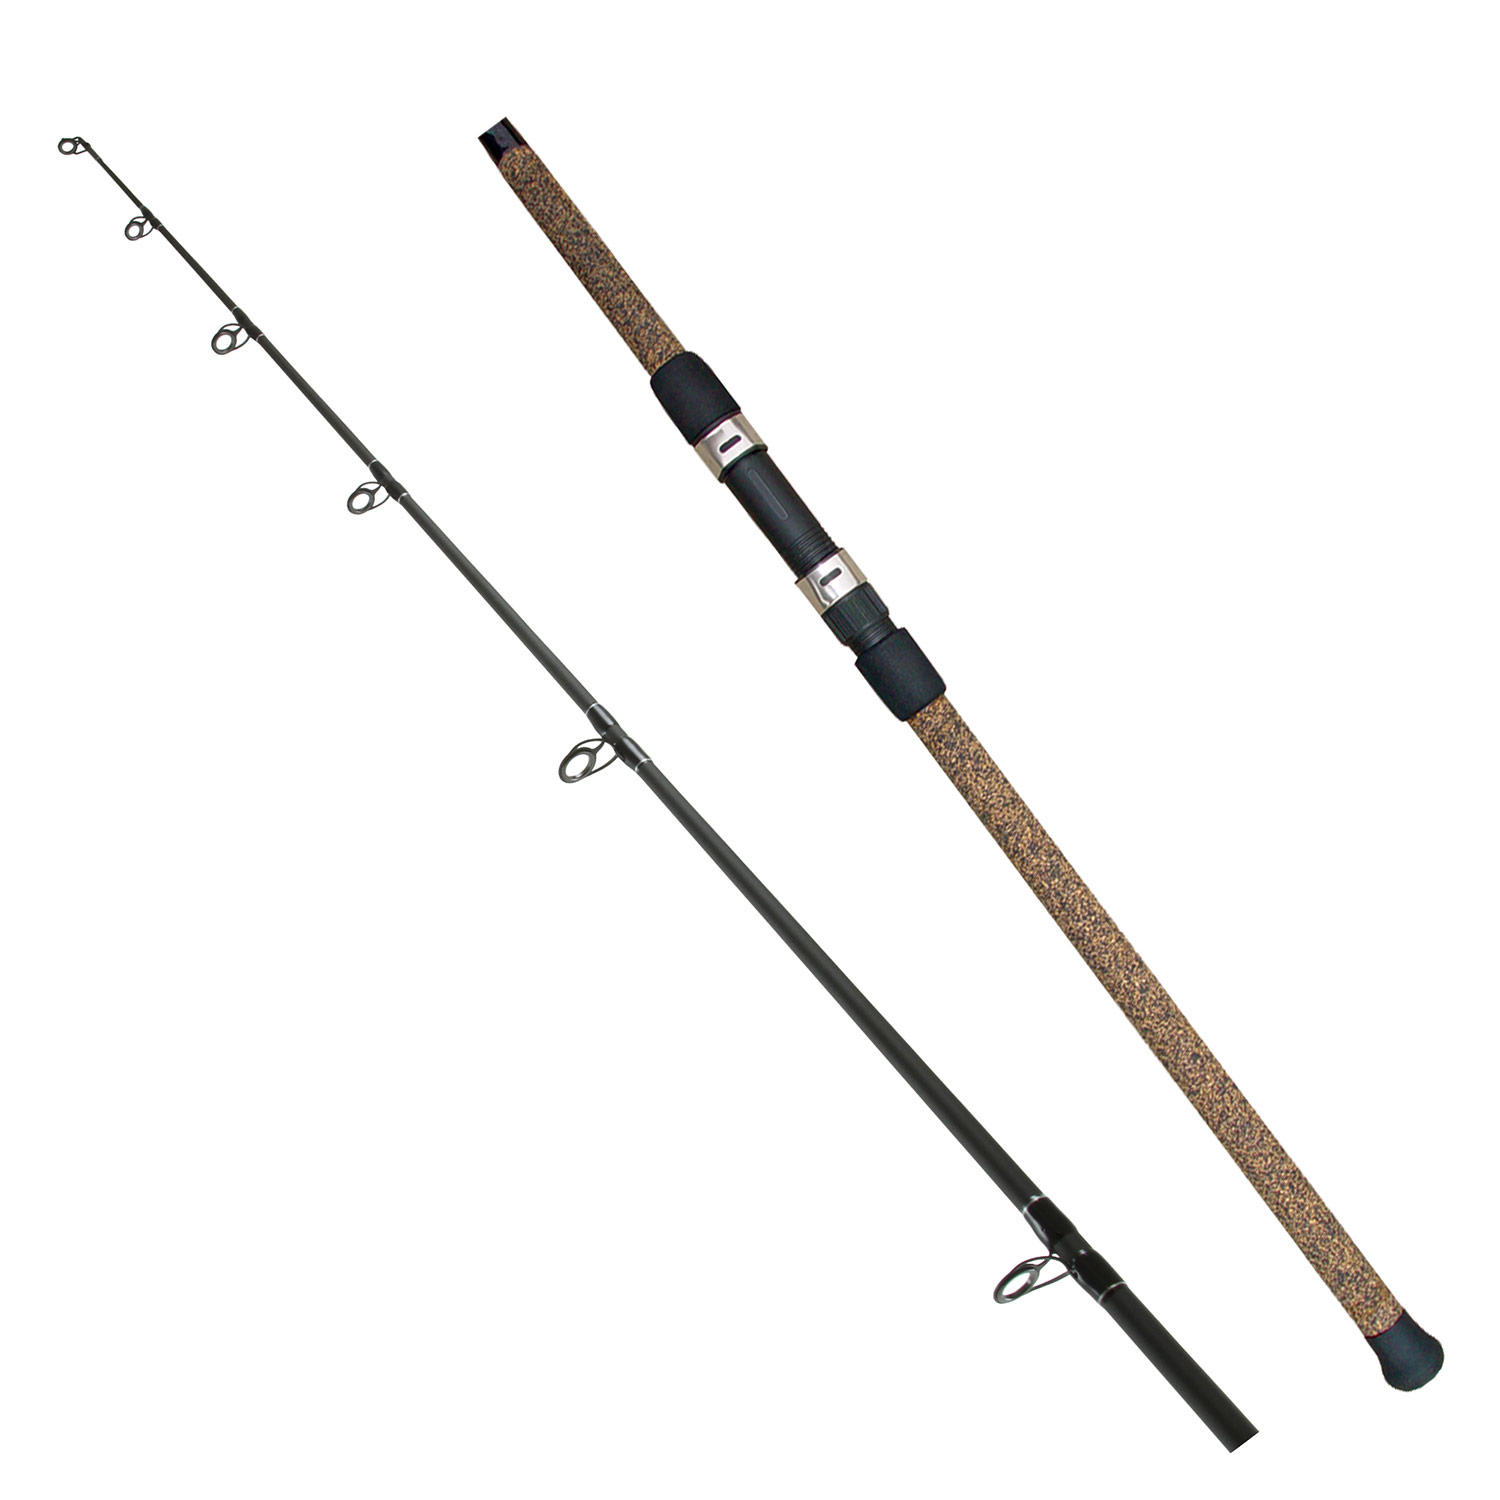  LITTMA Surf Rod，Surf Fishing Rod，Saltwater Spinning Rod，Carbon  Fiber Surf Spinning Rod with Fuji Guides, 8'/9'/10'/11'/12'，2Pcs Pack :  Sports & Outdoors